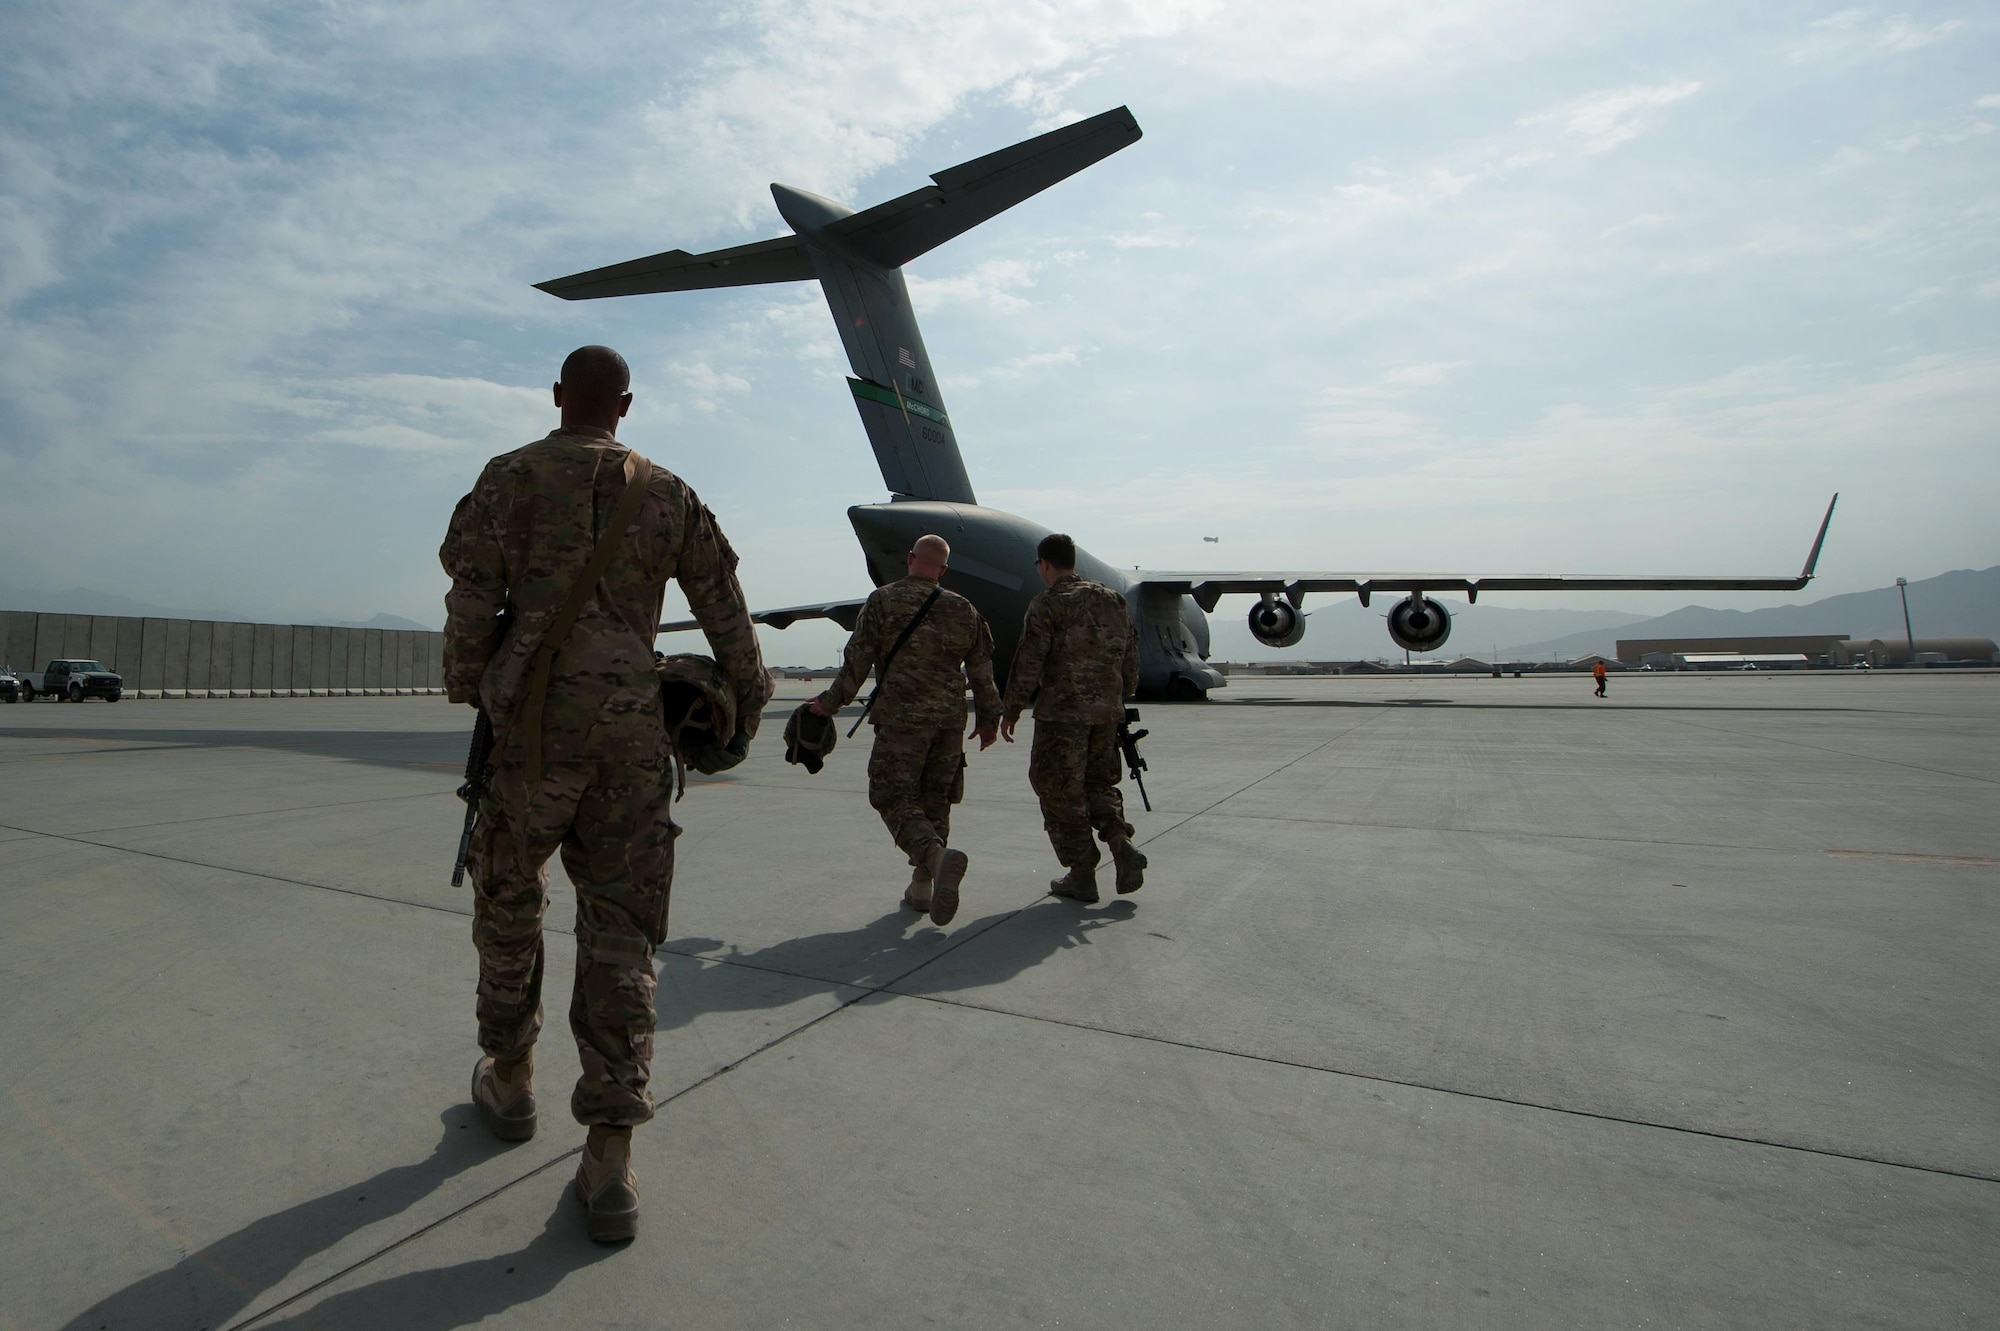 U.S. Soldiers assigned to the 1st Armored Division Resolute Support Sustainment Brigade walk to an Air Force C-17 Globemaster III aircraft to unload Mine-Resistant Ambush Protected vehicle at Bagram Airfield, Afghanistan, Sept. 21, 2015. USAF cargo aircraft have transported 31,500 short tons of cargo throughout Afghanistan this year (U.S. Air Force photo by Tech. Sgt. Joseph Swafford/Released)